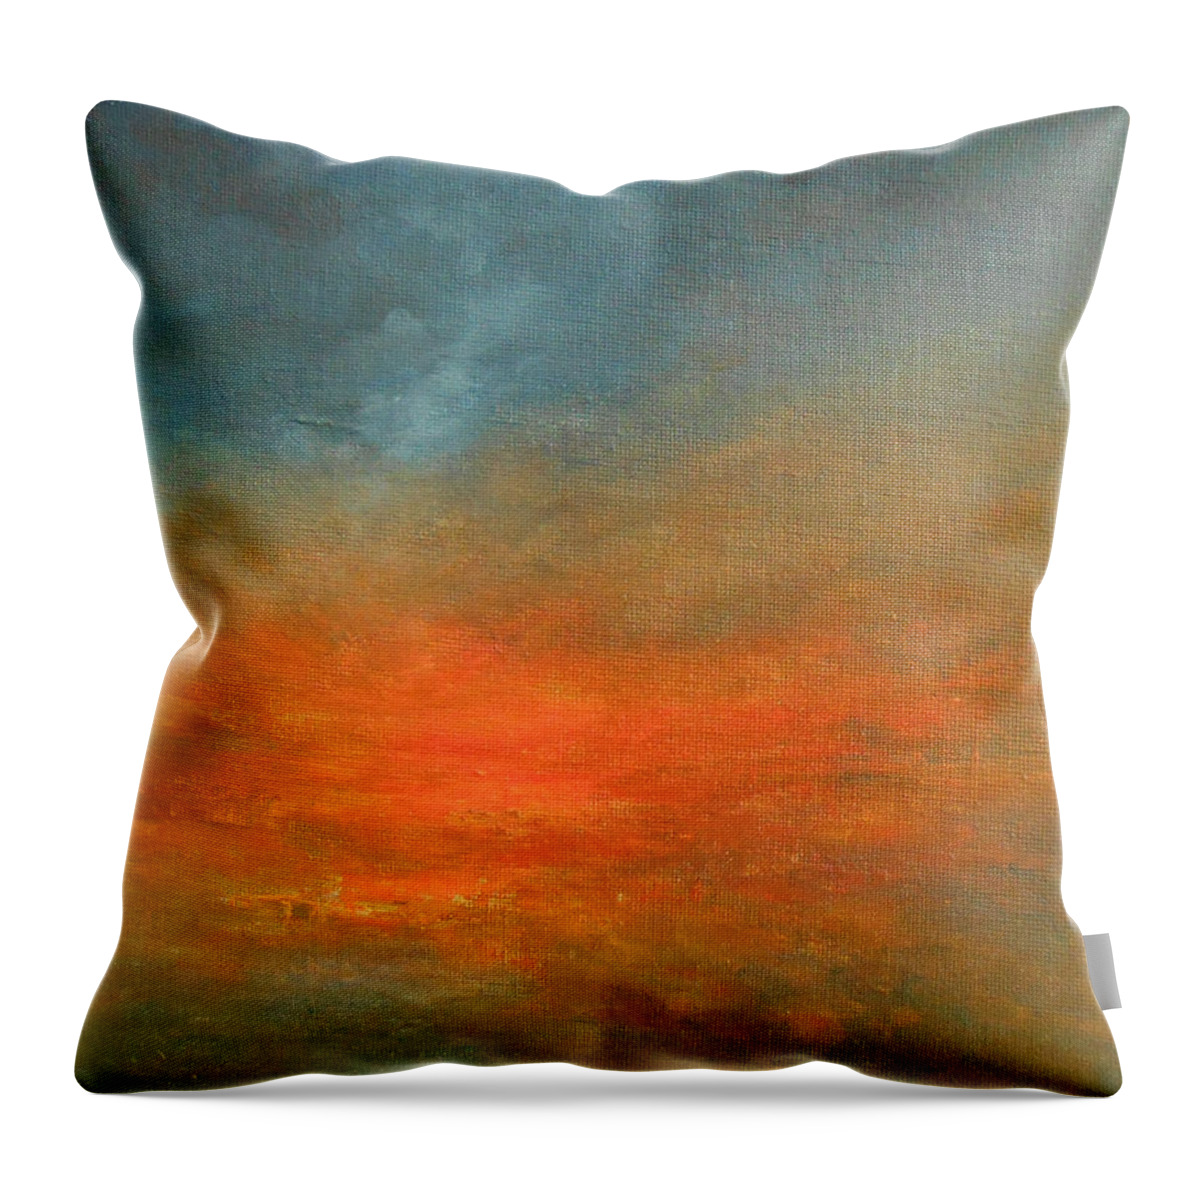 Abstract Throw Pillow featuring the painting Sundown by Jane See